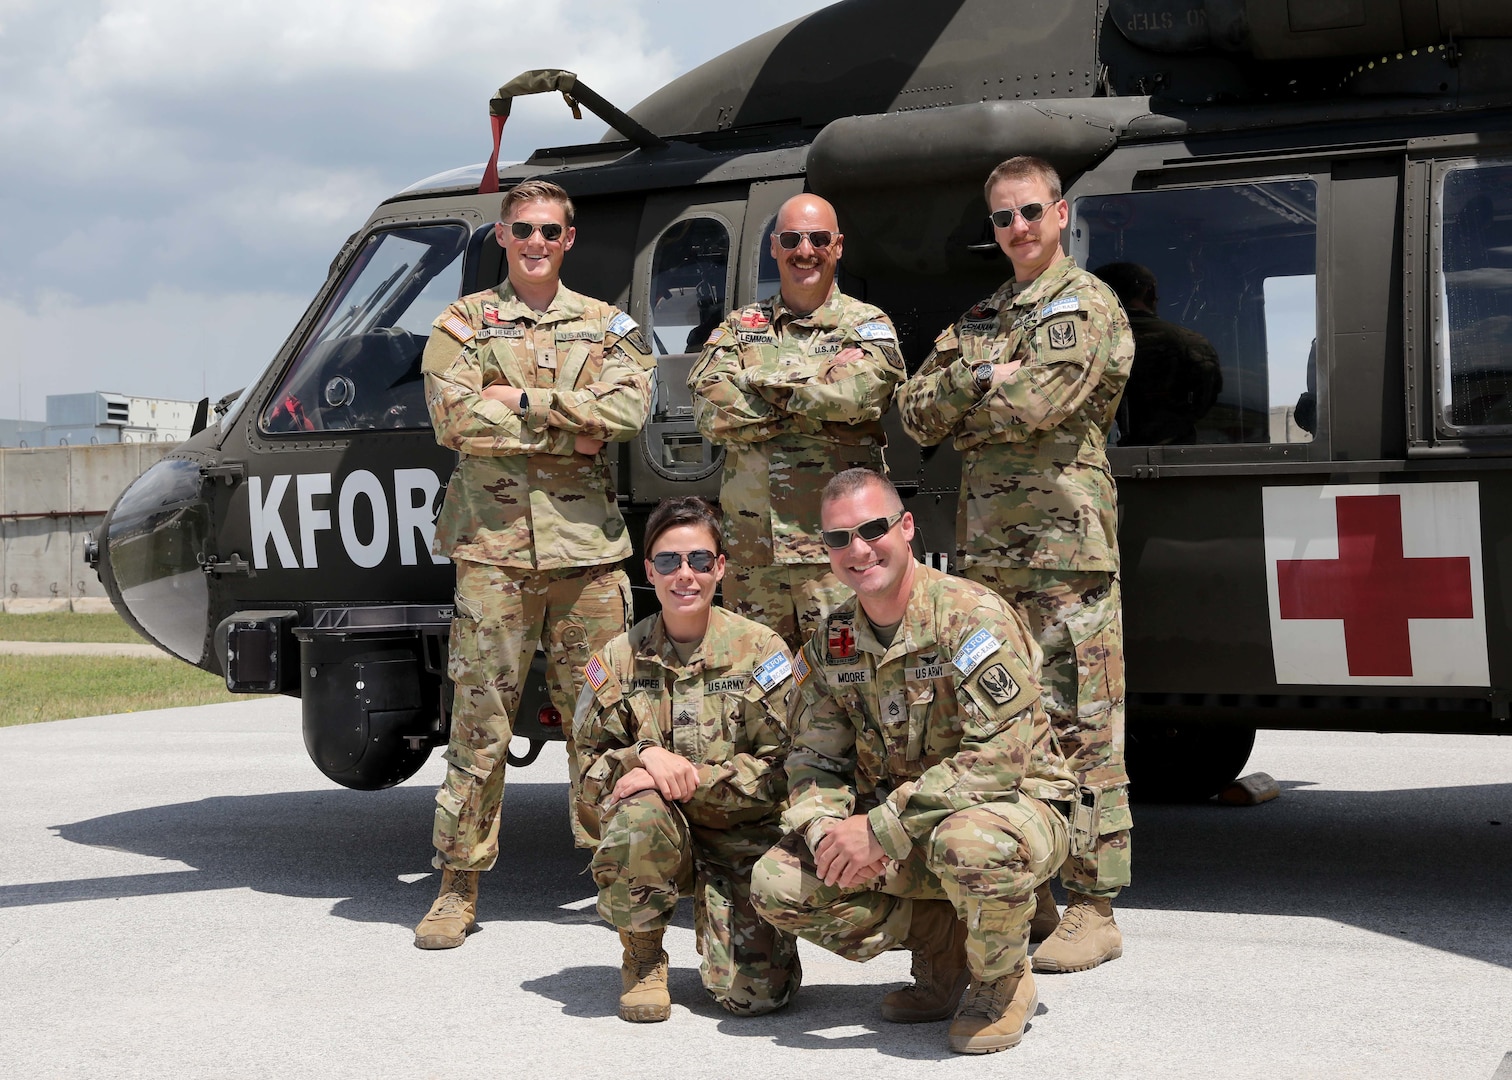 Left to right, back to front: U.S. Army Chief Warrant Officer 2 William Von Hemert, Chief Warrant Officer 4 Brady Lemmon, Sgt. Christopher Buchanan, Sgt. Ashley Camper and Staff Sgt. Nathaniel Moore, medevac crewmembers with Detachment 2, Charlie Company, 1st Battalion, 169th Aviation Regiment, Virginia National Guard, in front of their UH-60 Black Hawk helicopter at Camp Bondsteel, Kosovo, June 2, 2022. The team  evacuated two injured Albanian State Police officers from the mountainous region of northern Albania.